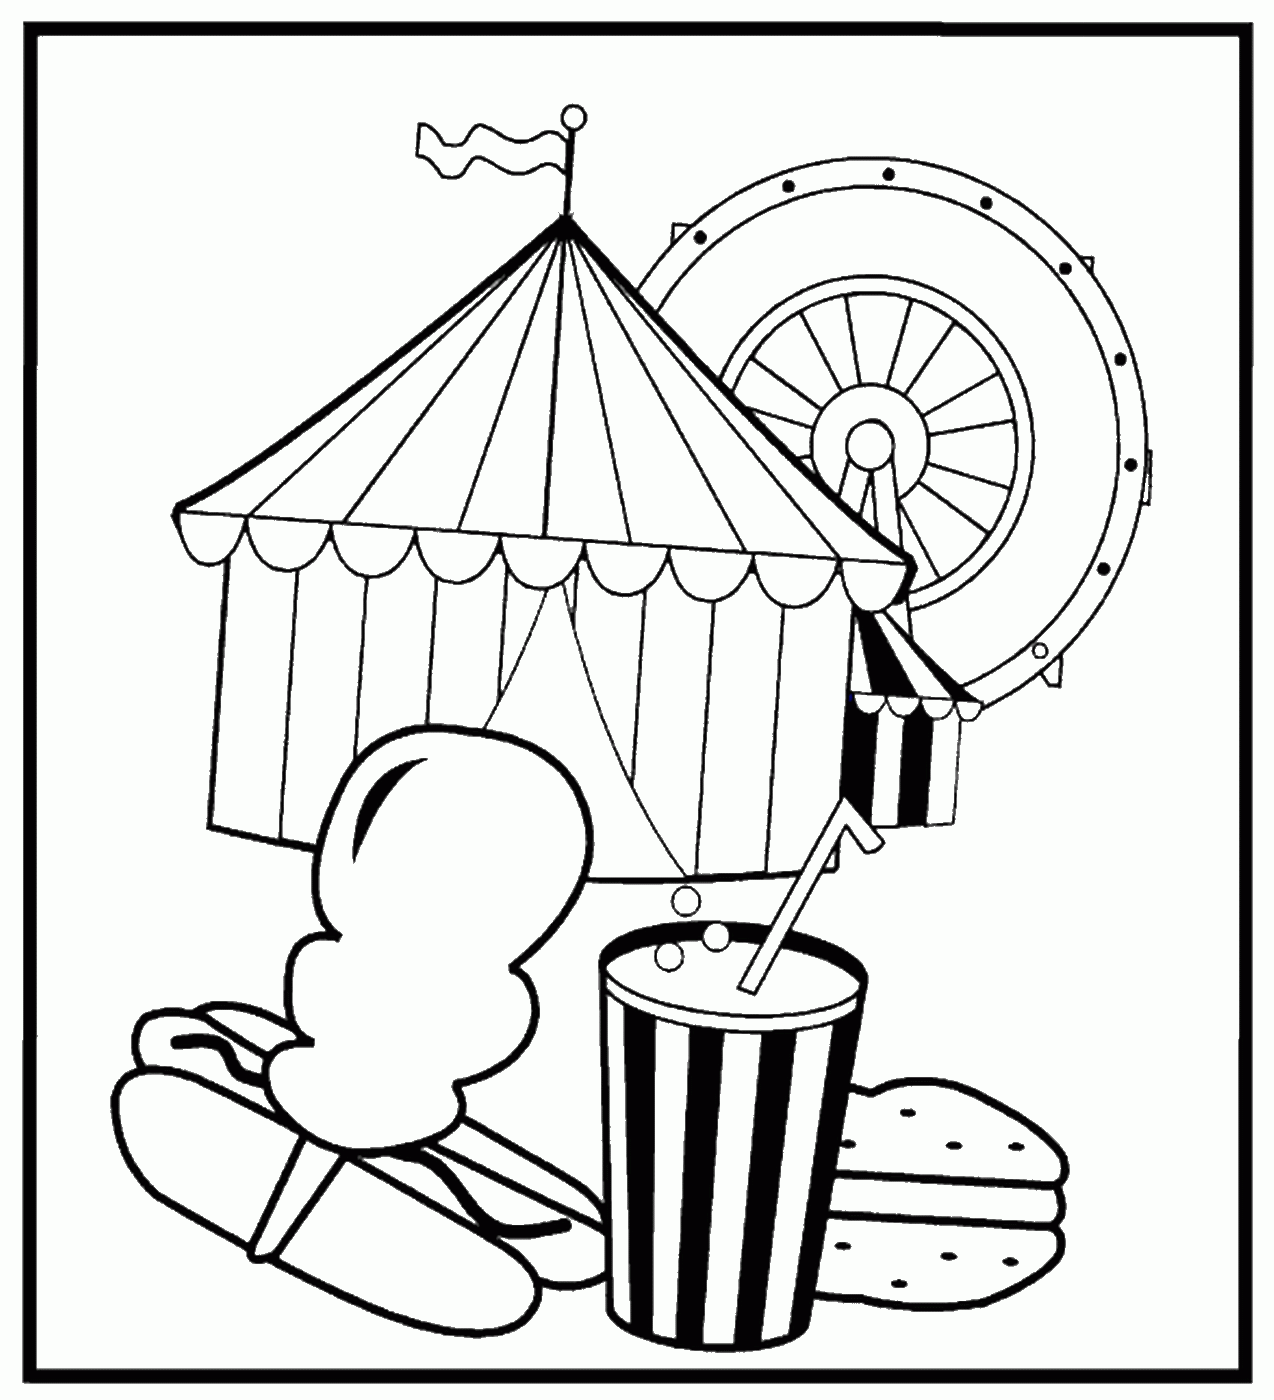 Circus Coloring Pages circusc2 Printable 2021 1573 Coloring4free